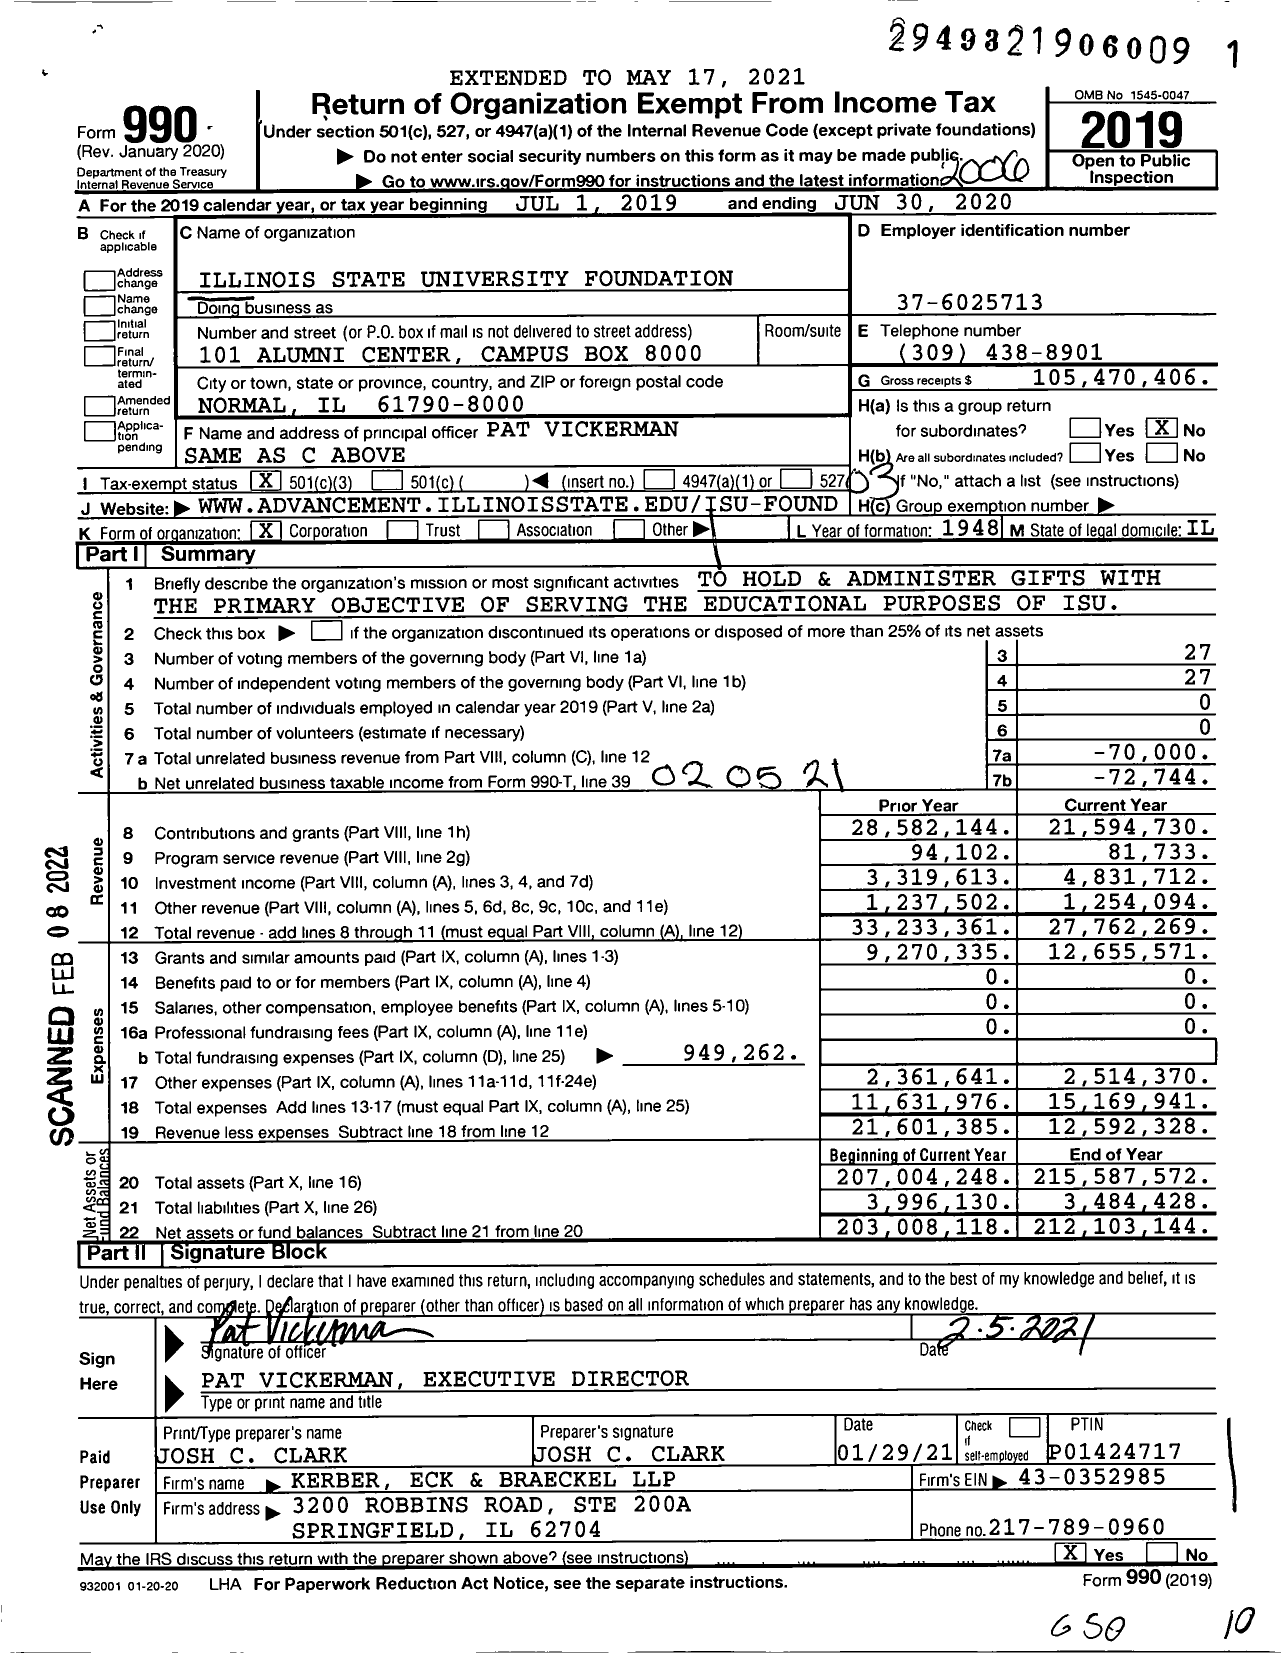 Image of first page of 2019 Form 990 for Illinois State University Foundation